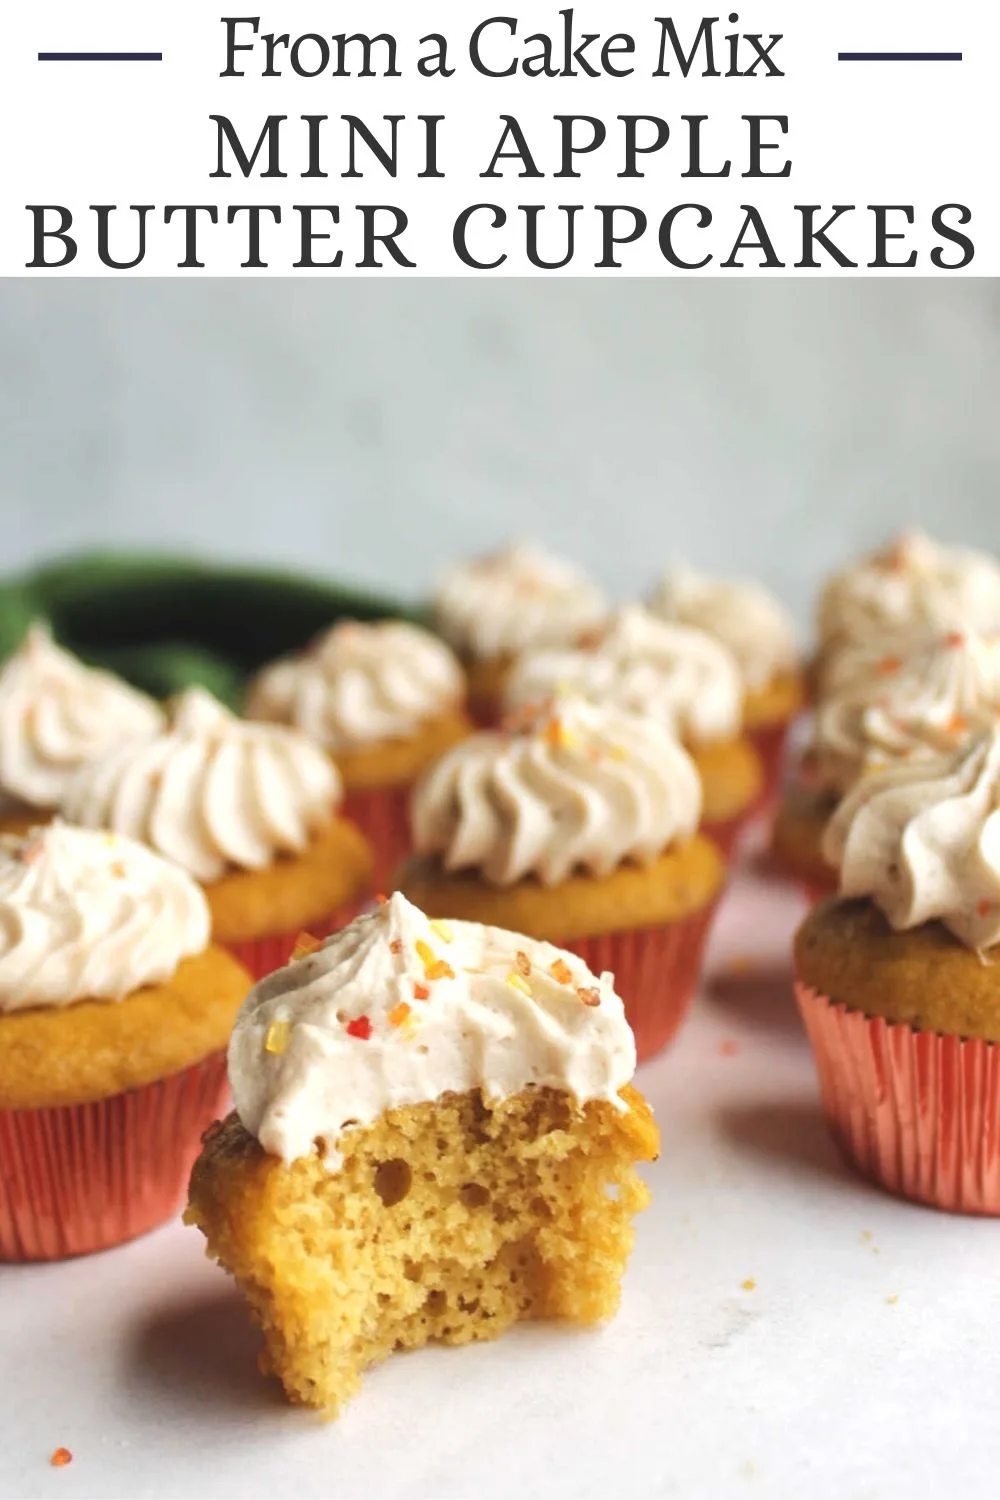 These cute little two bite mini apple butter cupcakes are super simple to put together. They only take 4 ingredients to make and they are perfect for fall.